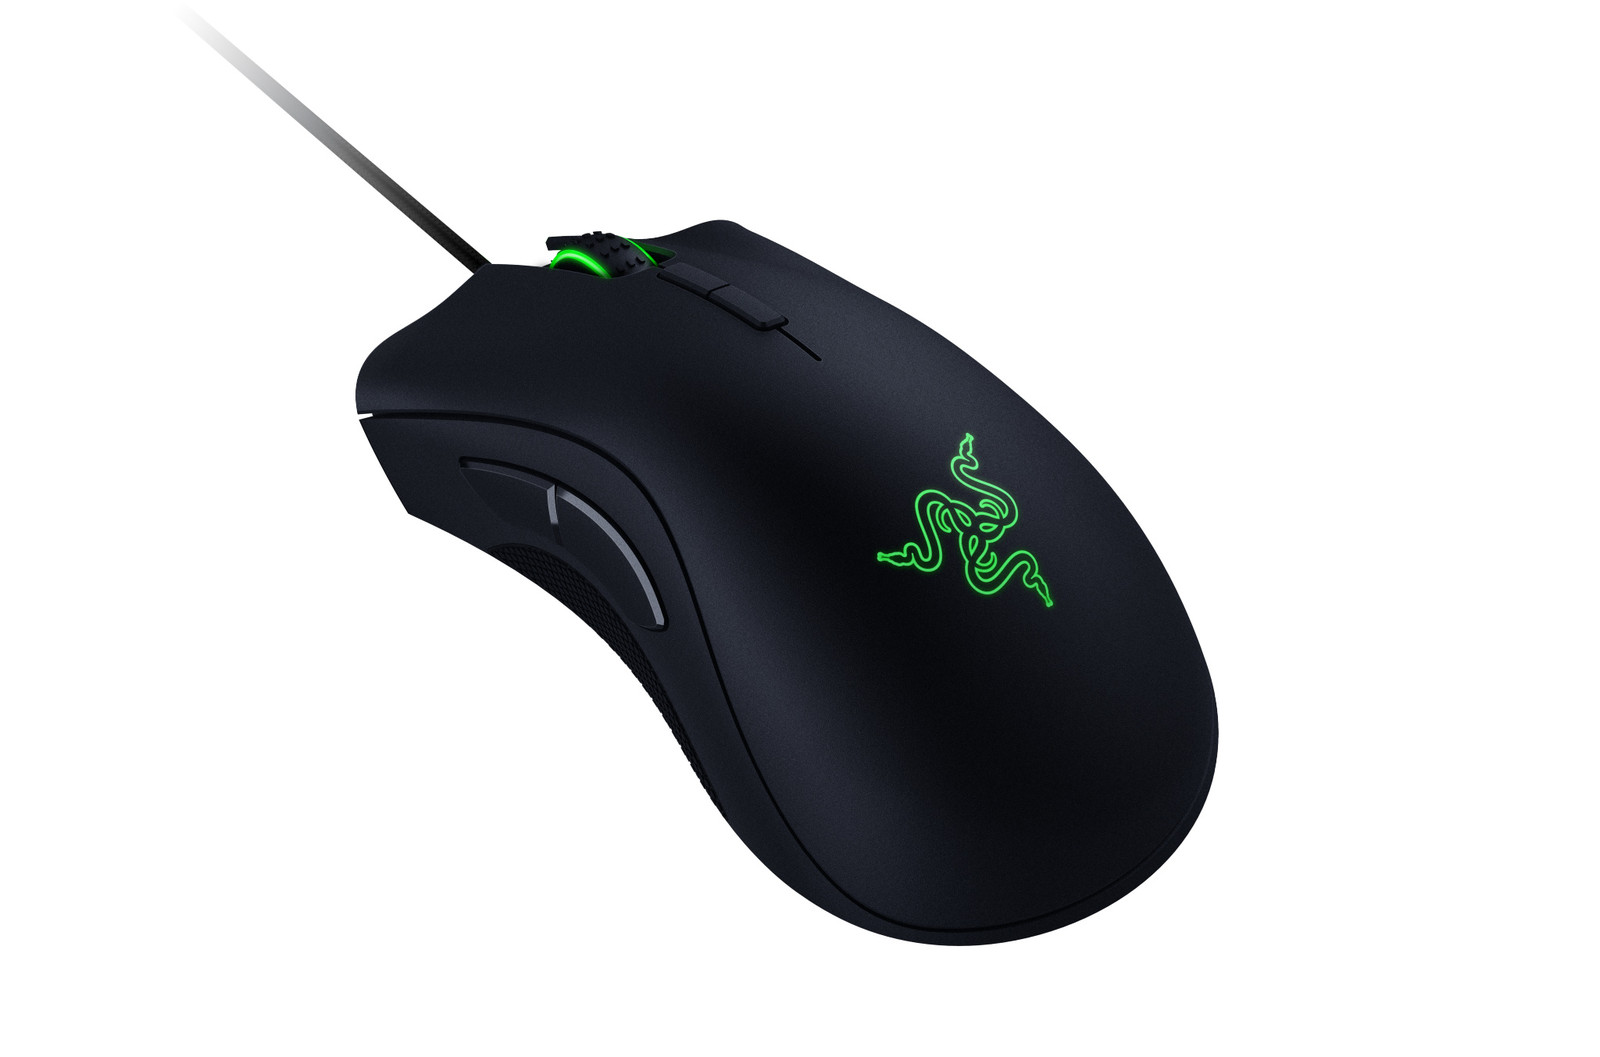 razer-deathadder-elite-will-be-equipped-with-best-optical-sensor-and